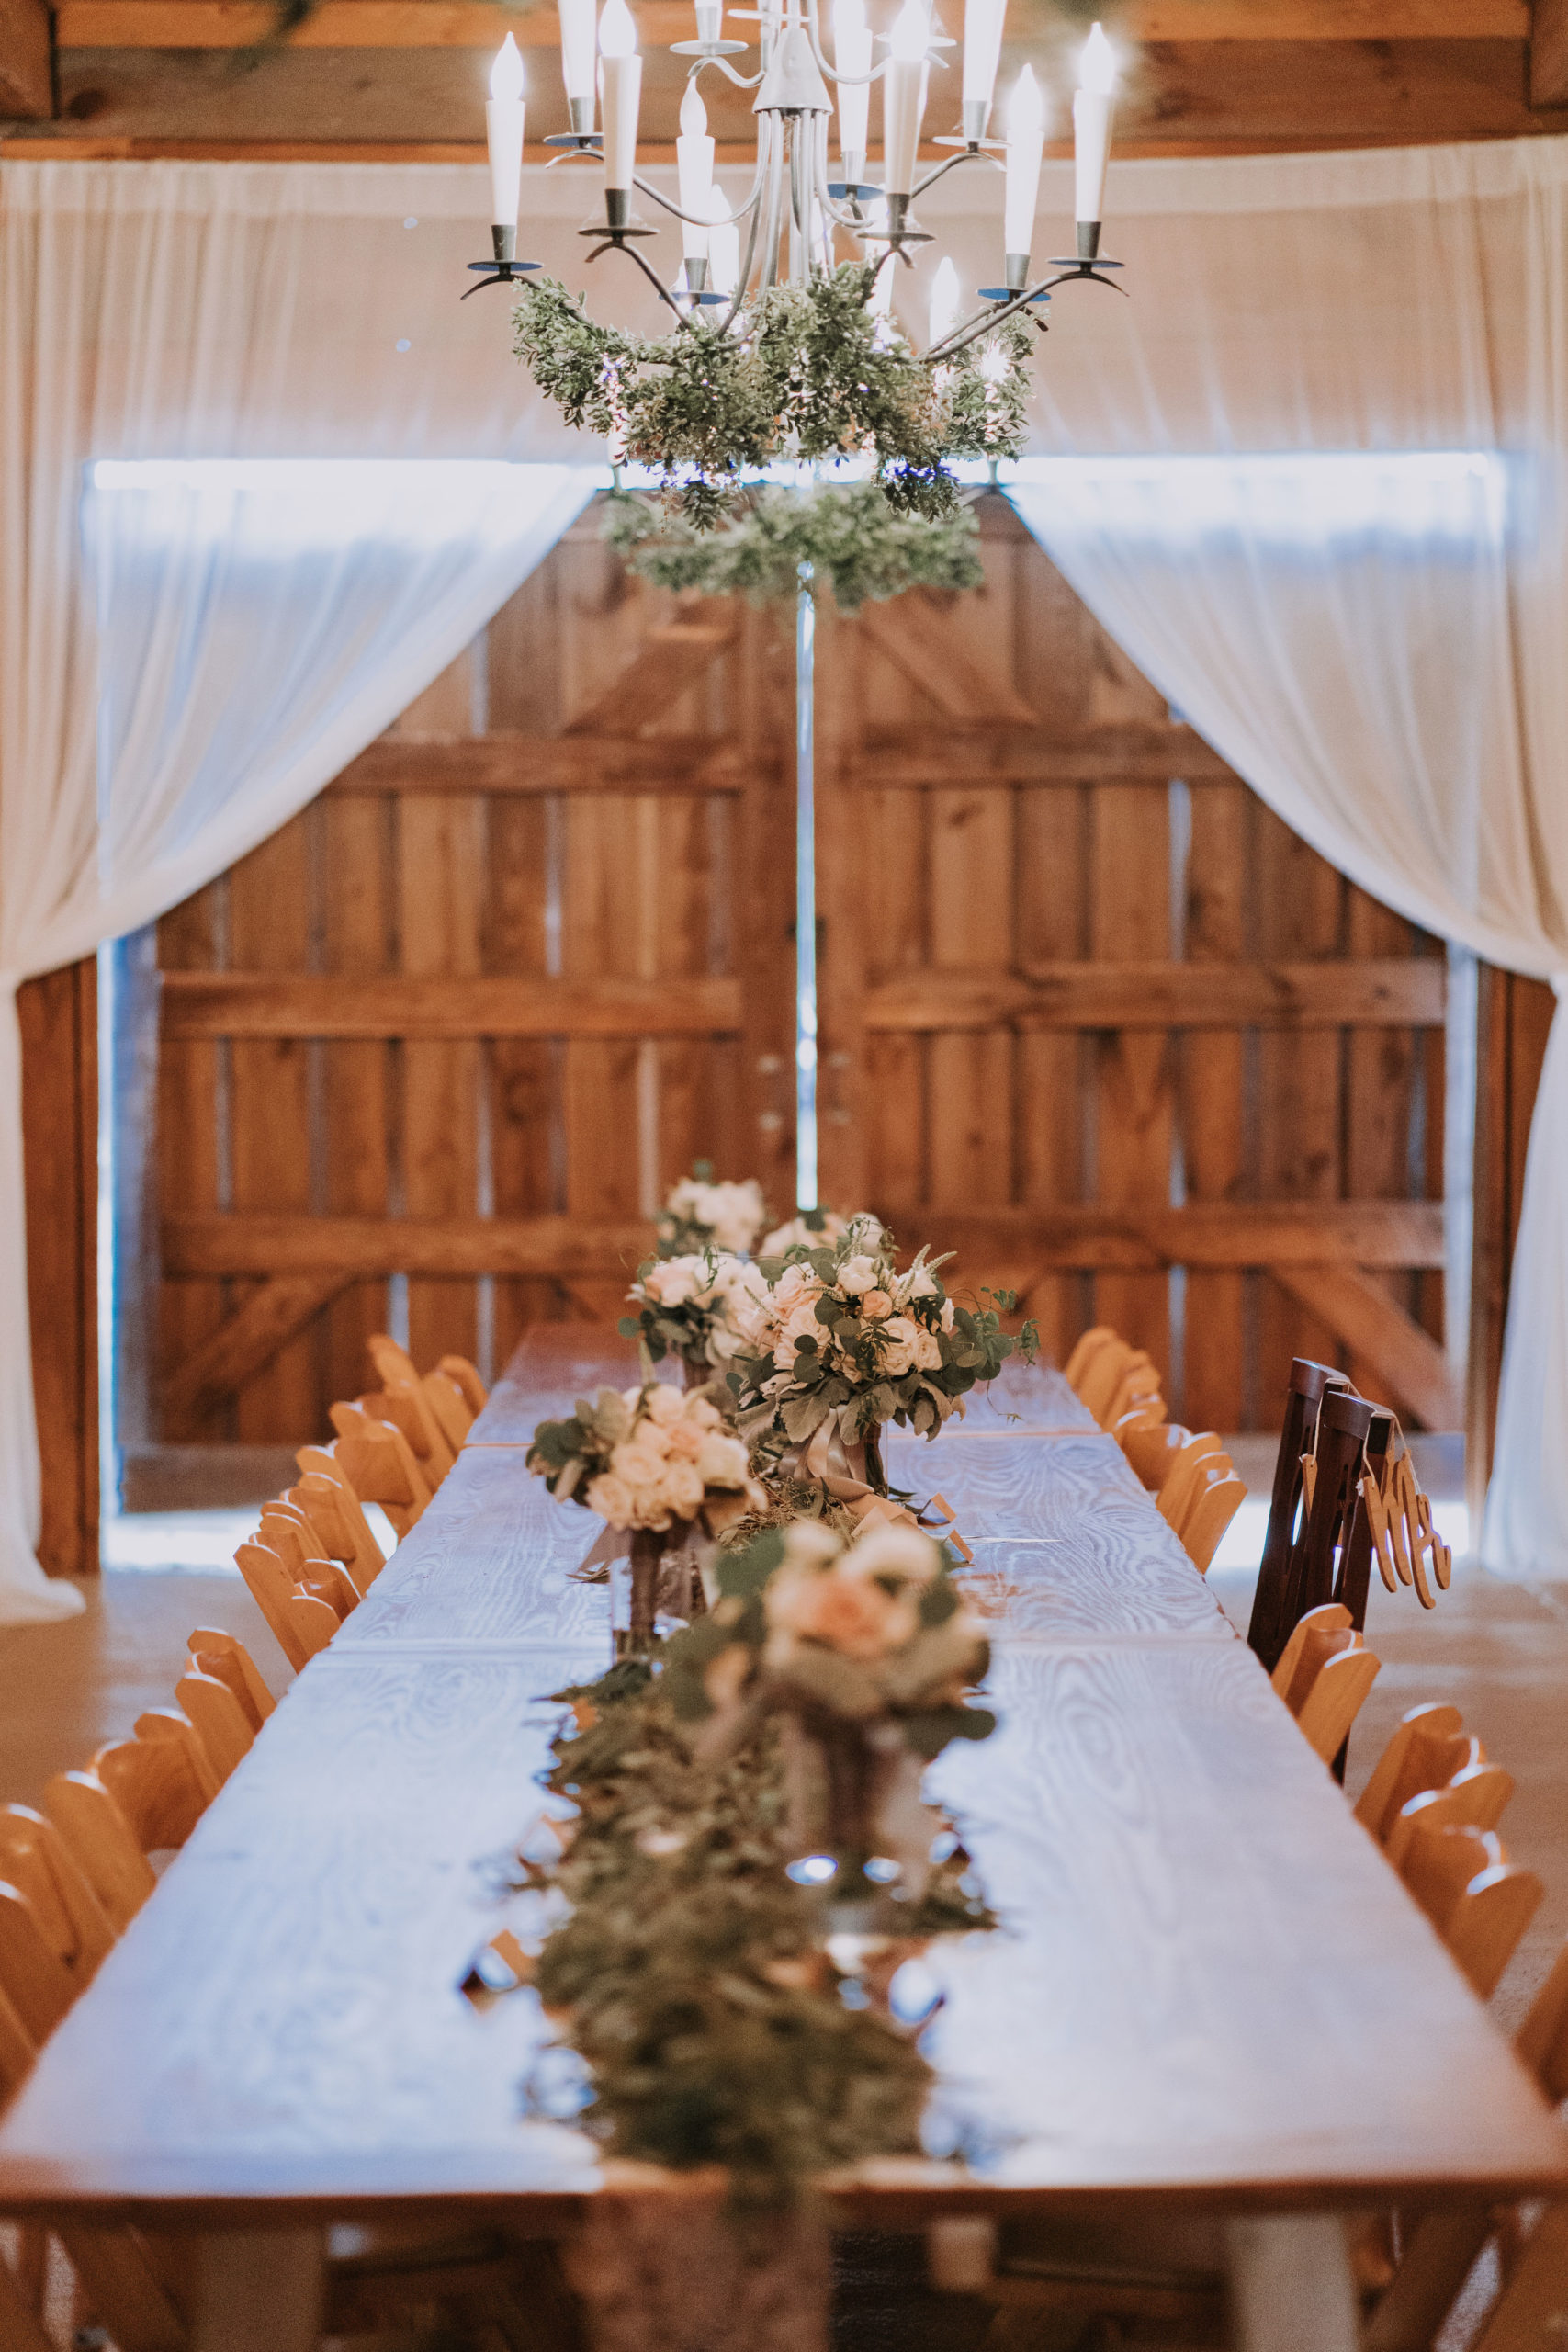 Barn estate table with blush flowers and garland along the 20 feet of table. 